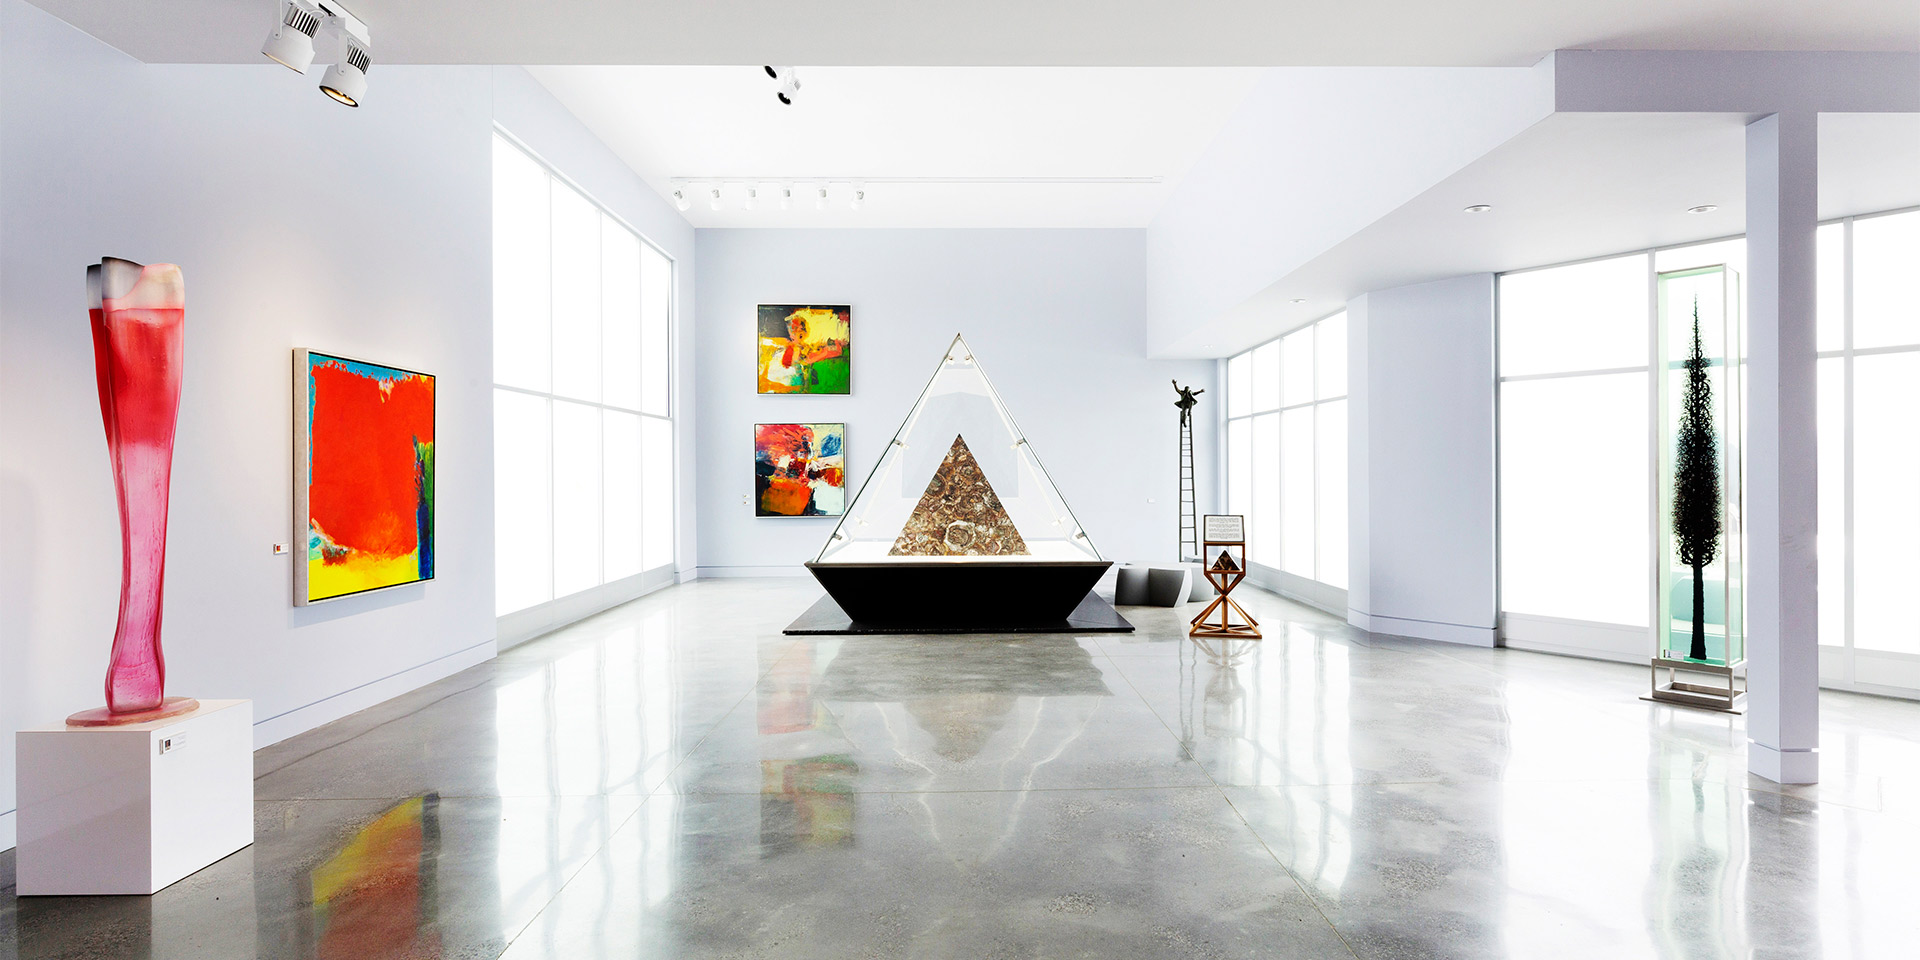 gallery style room with art and large glass pyramid sculpture in the middle